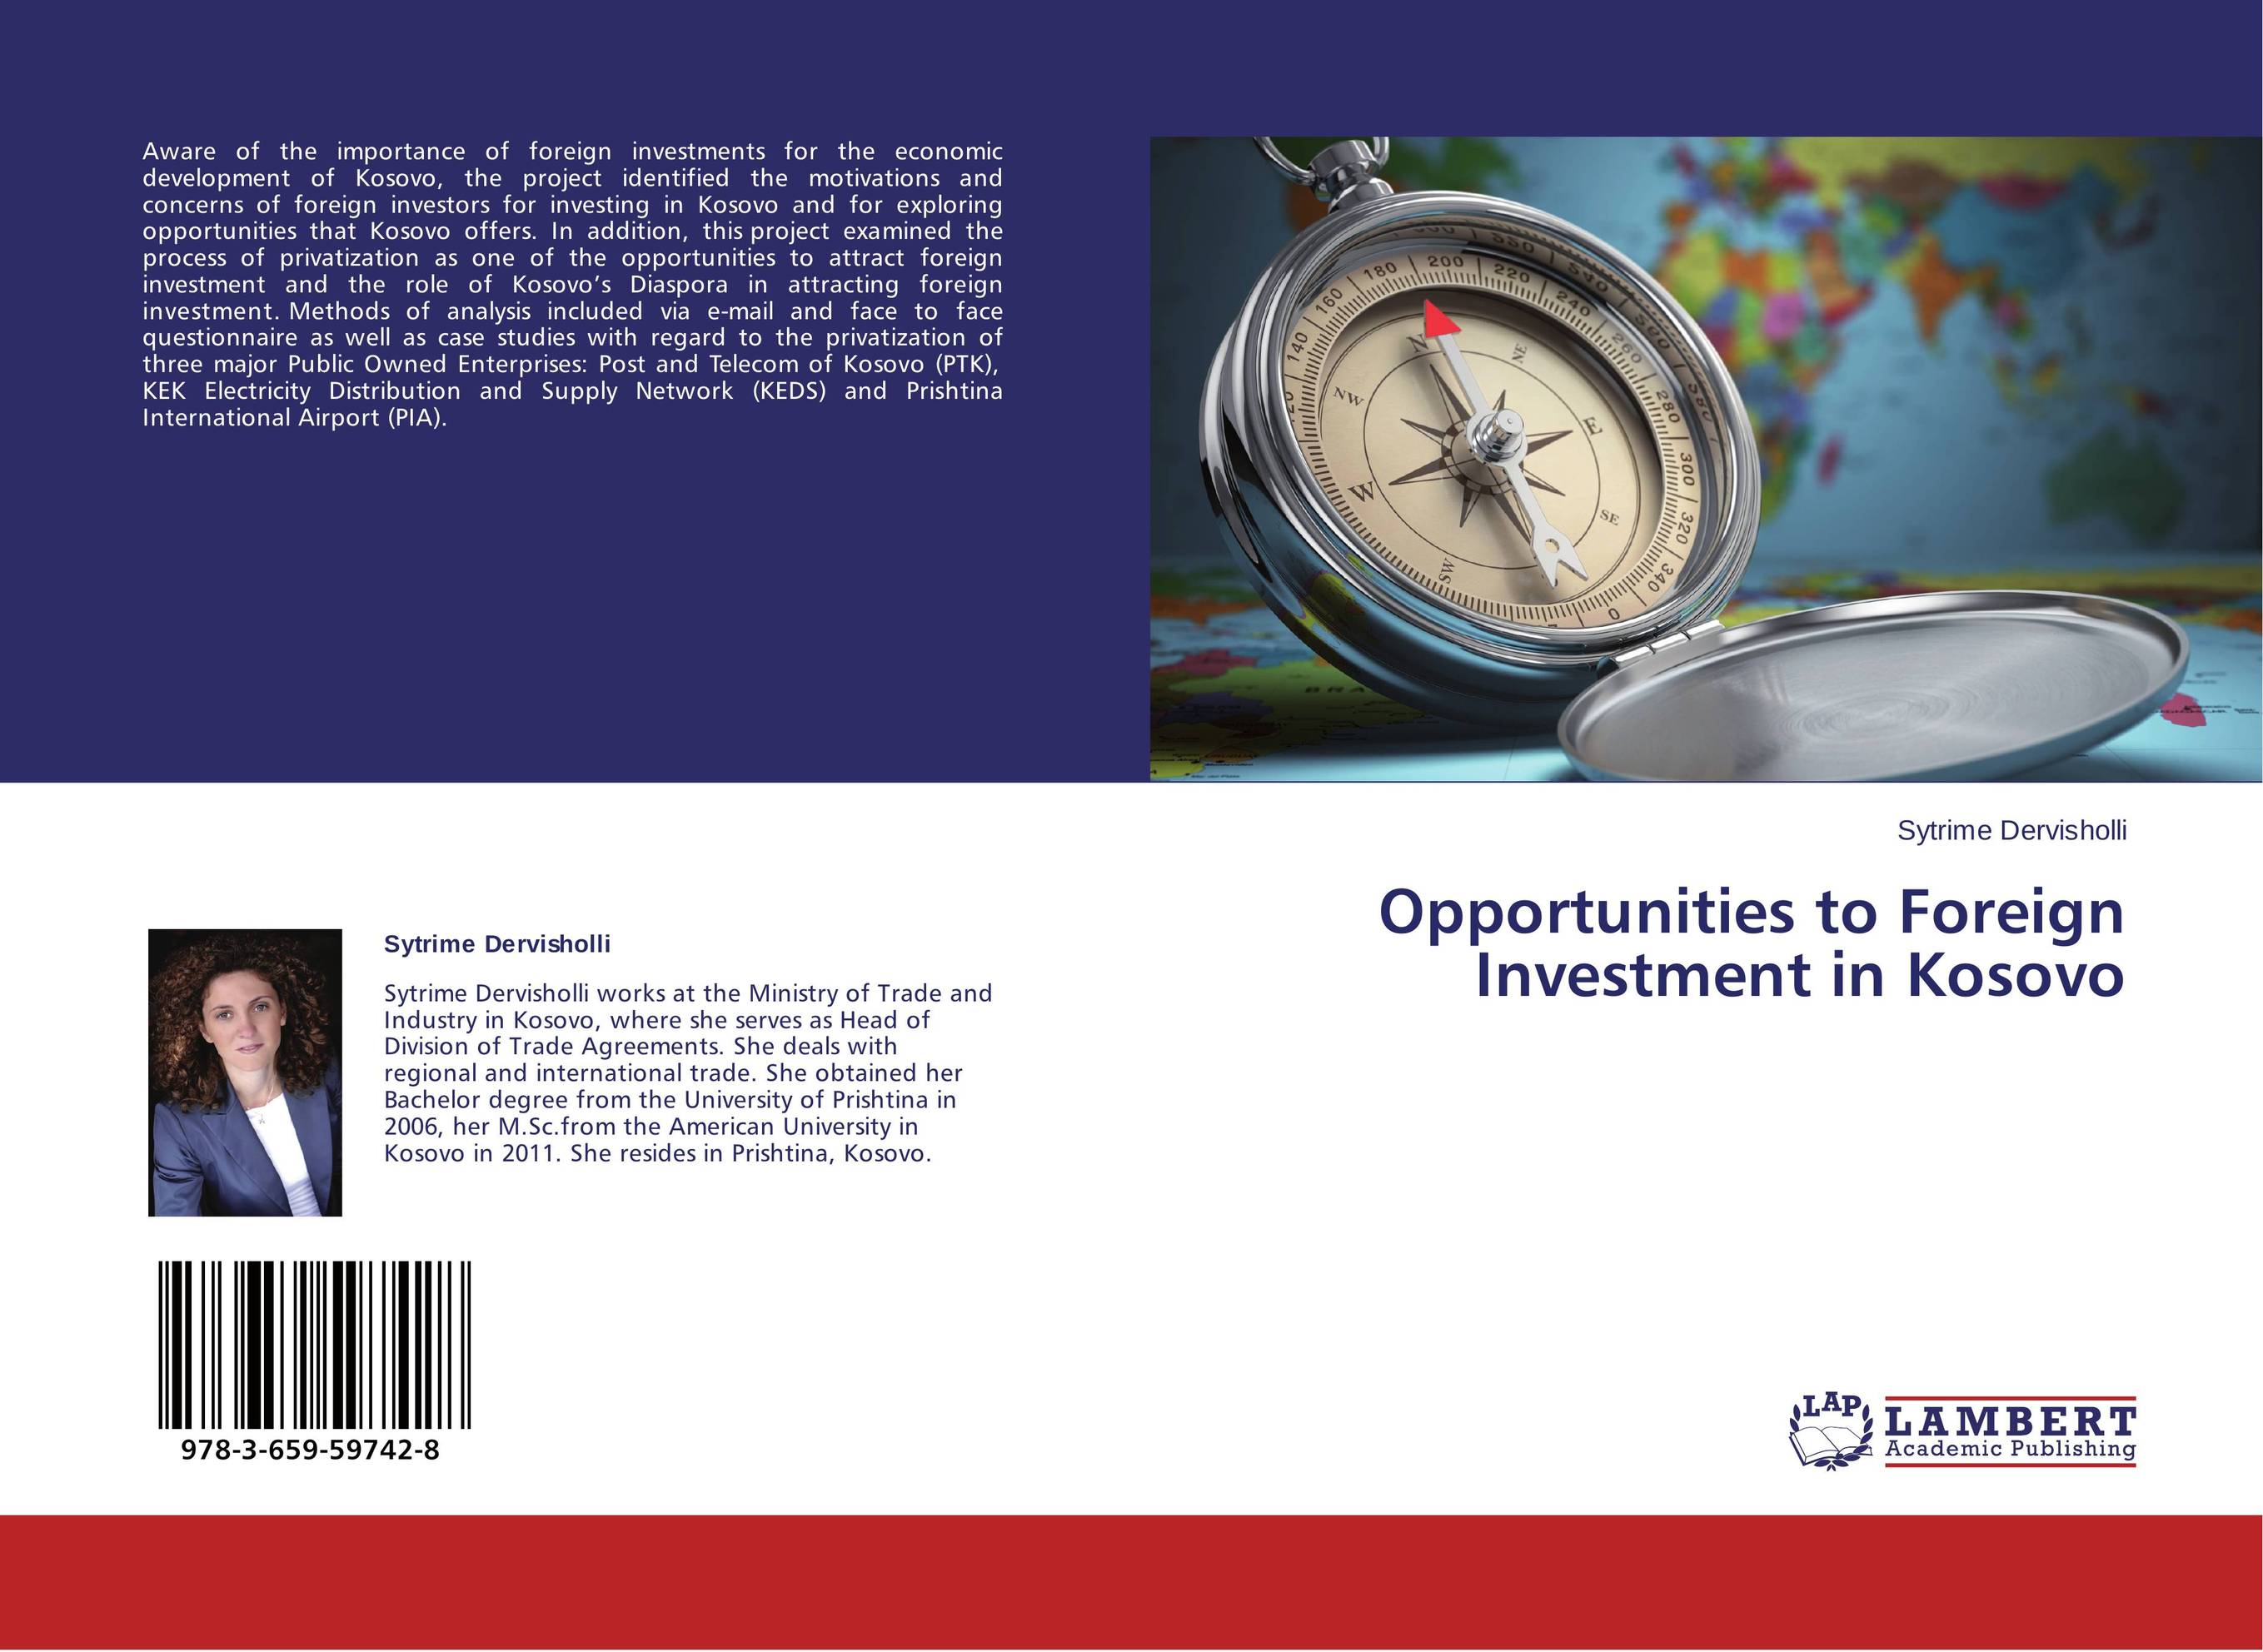 Opportunities to Foreign Investment in Kosovo